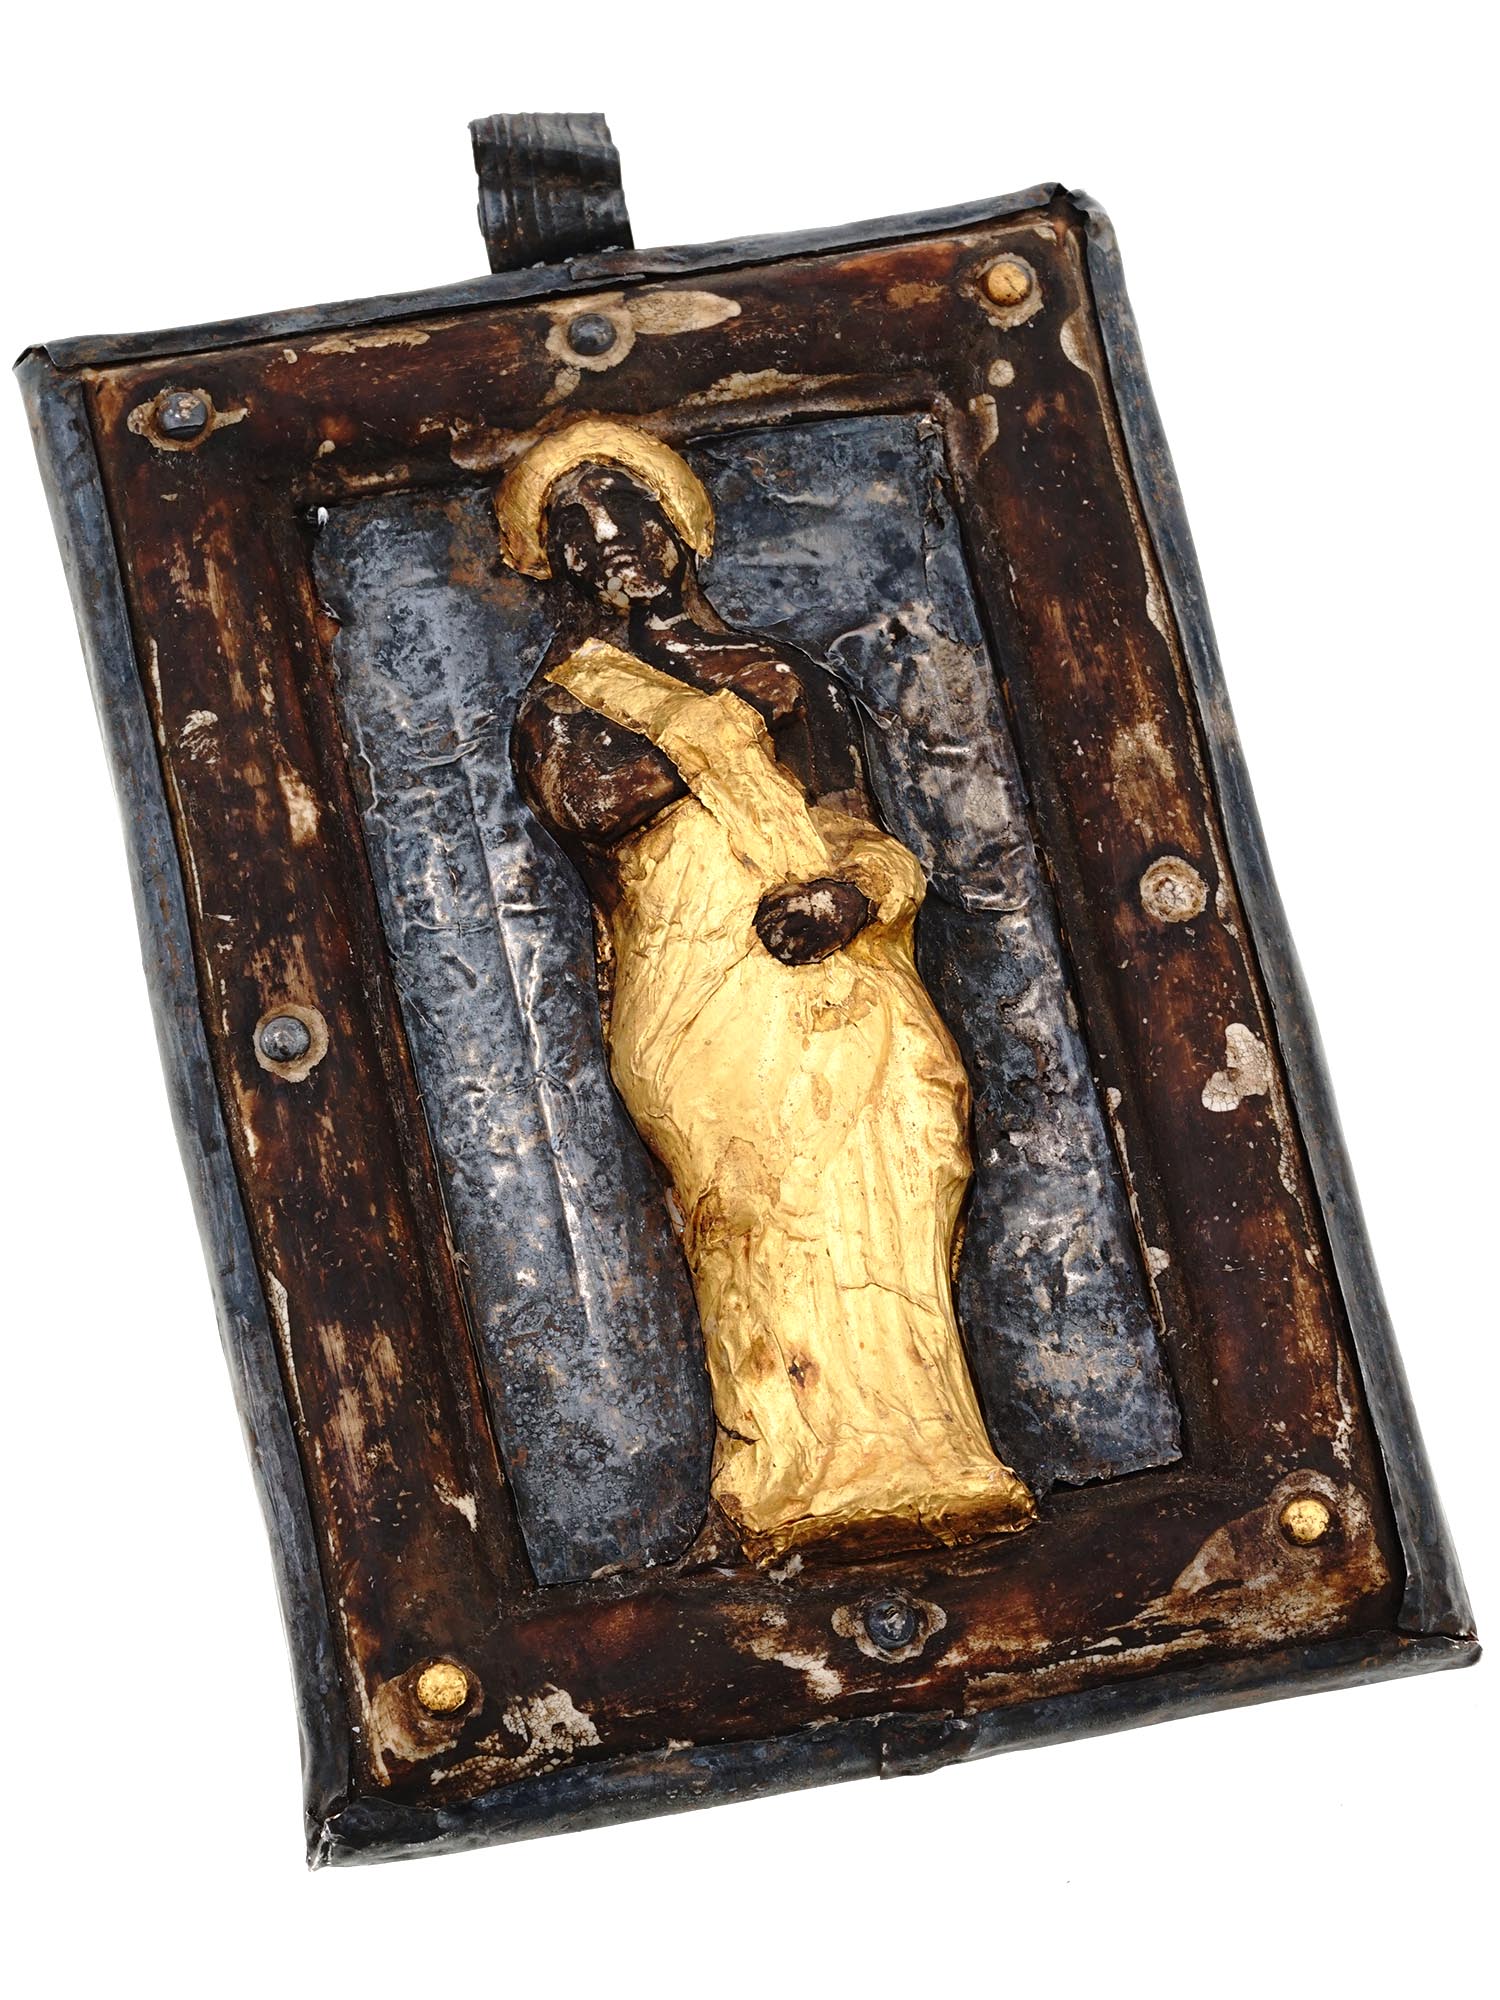 MEDIEVAL CHRISTIAN ICON PENDANT WITH GOLD LEAF PIC-0